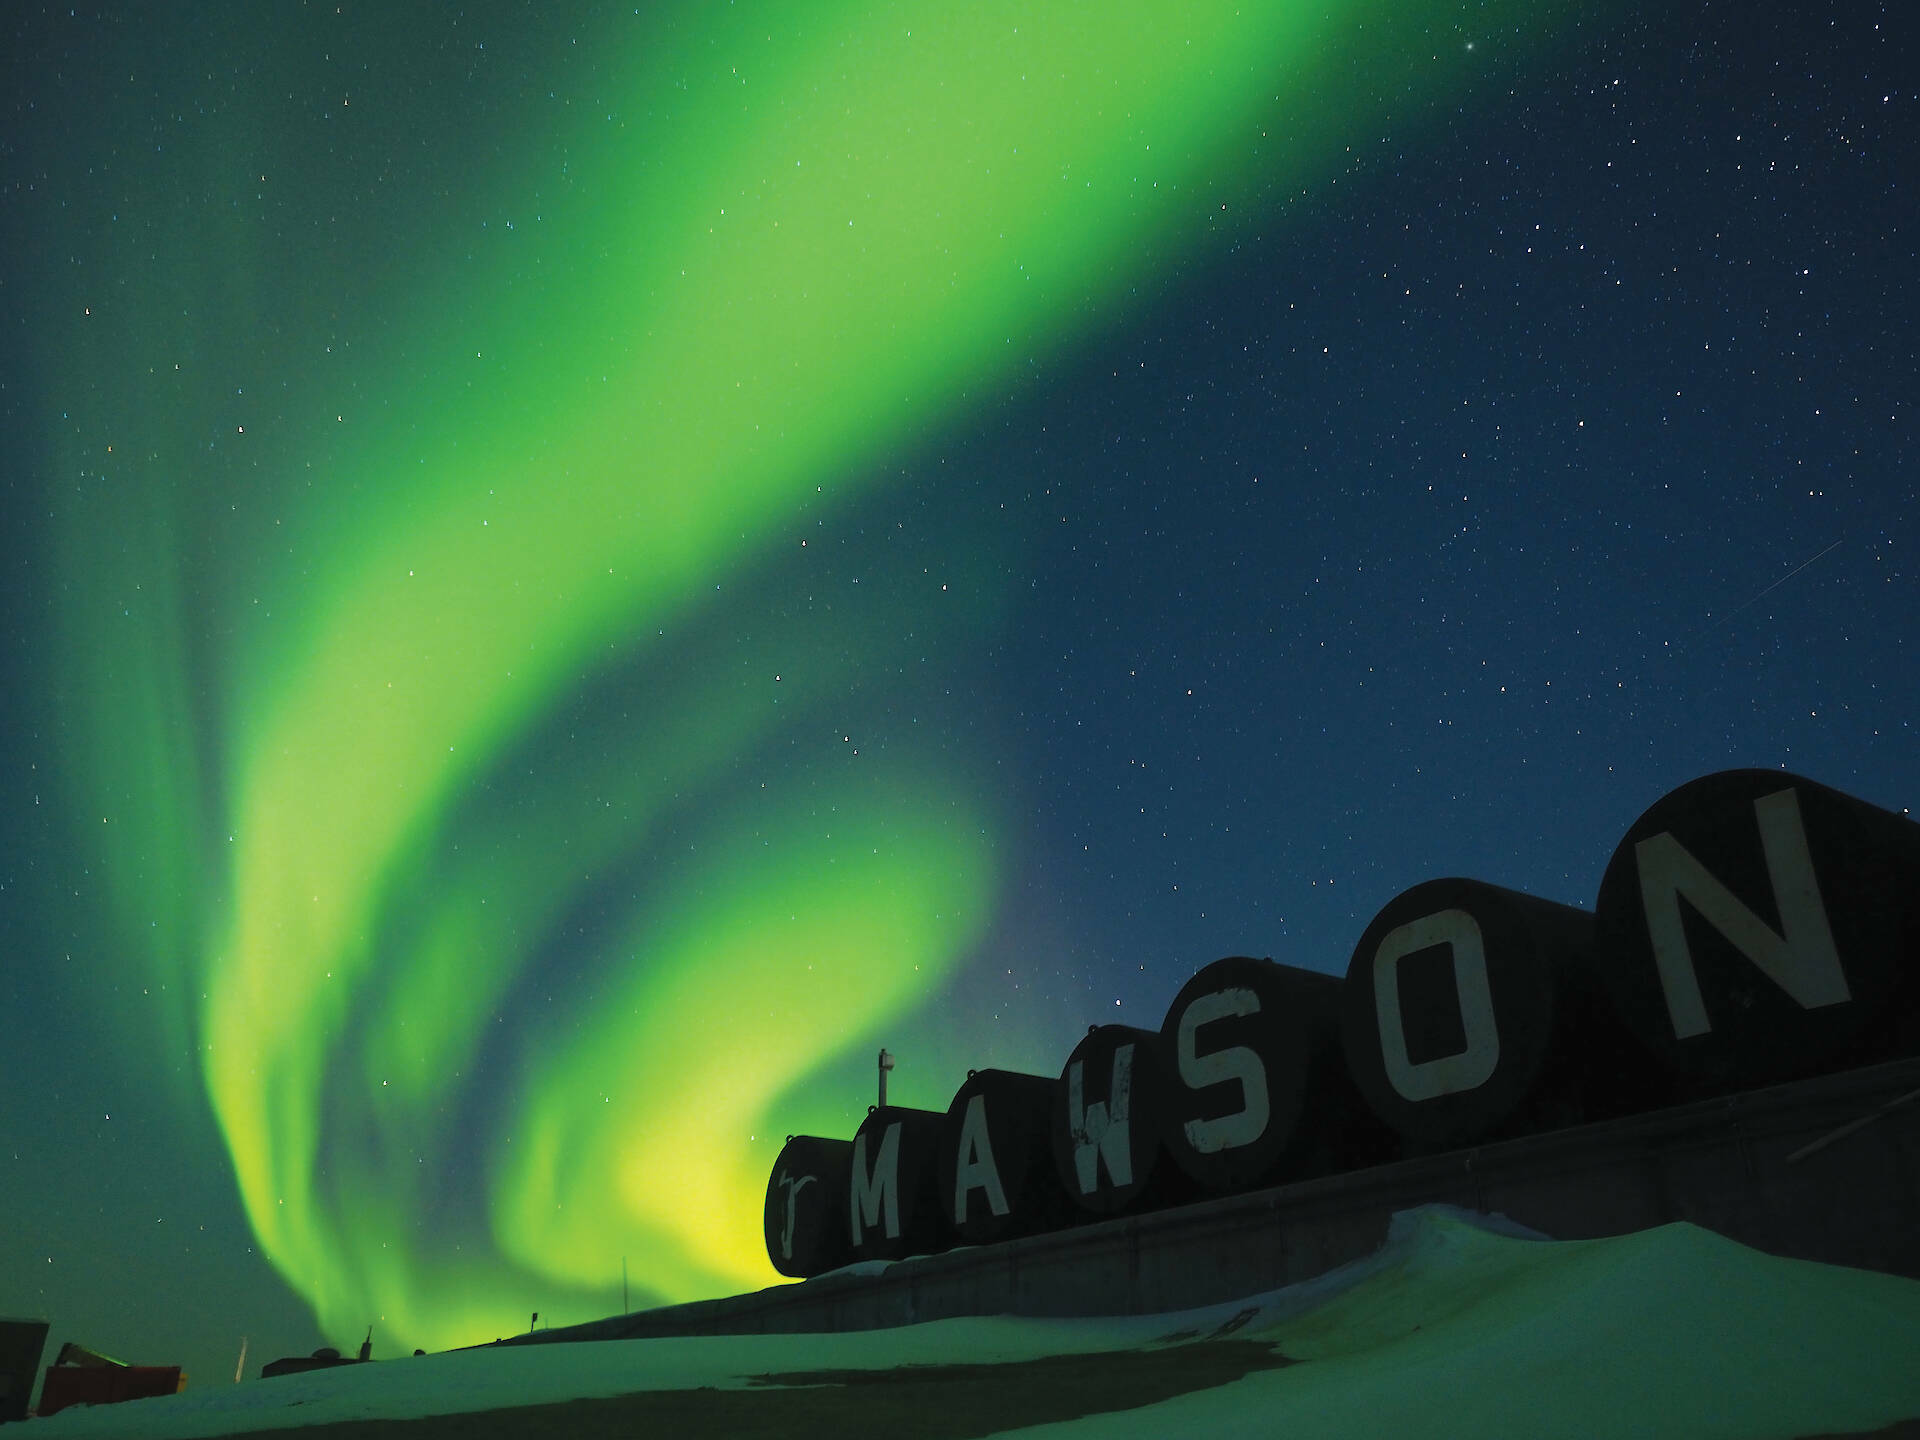 Green aurora over Mawson station sign painted on fuel drums.